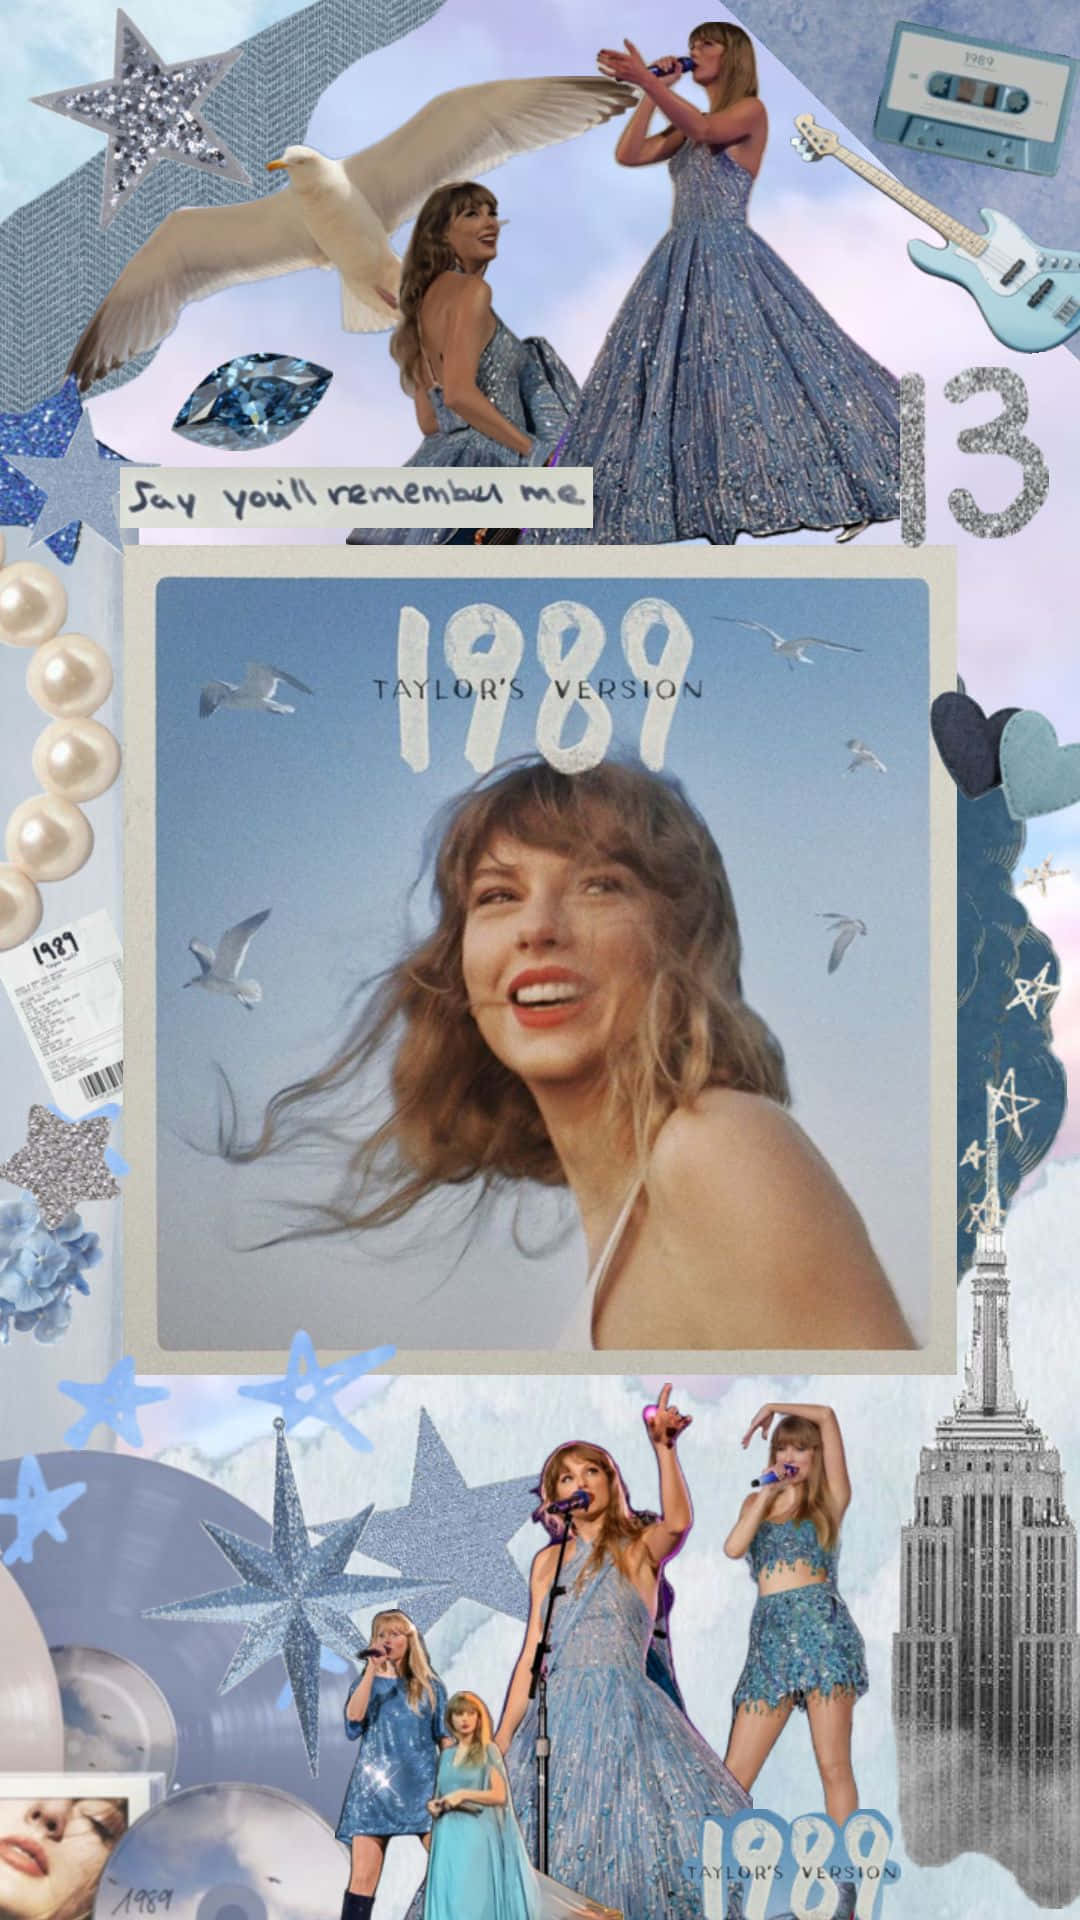 Taylor Swift1989 Tribute Collage Wallpaper